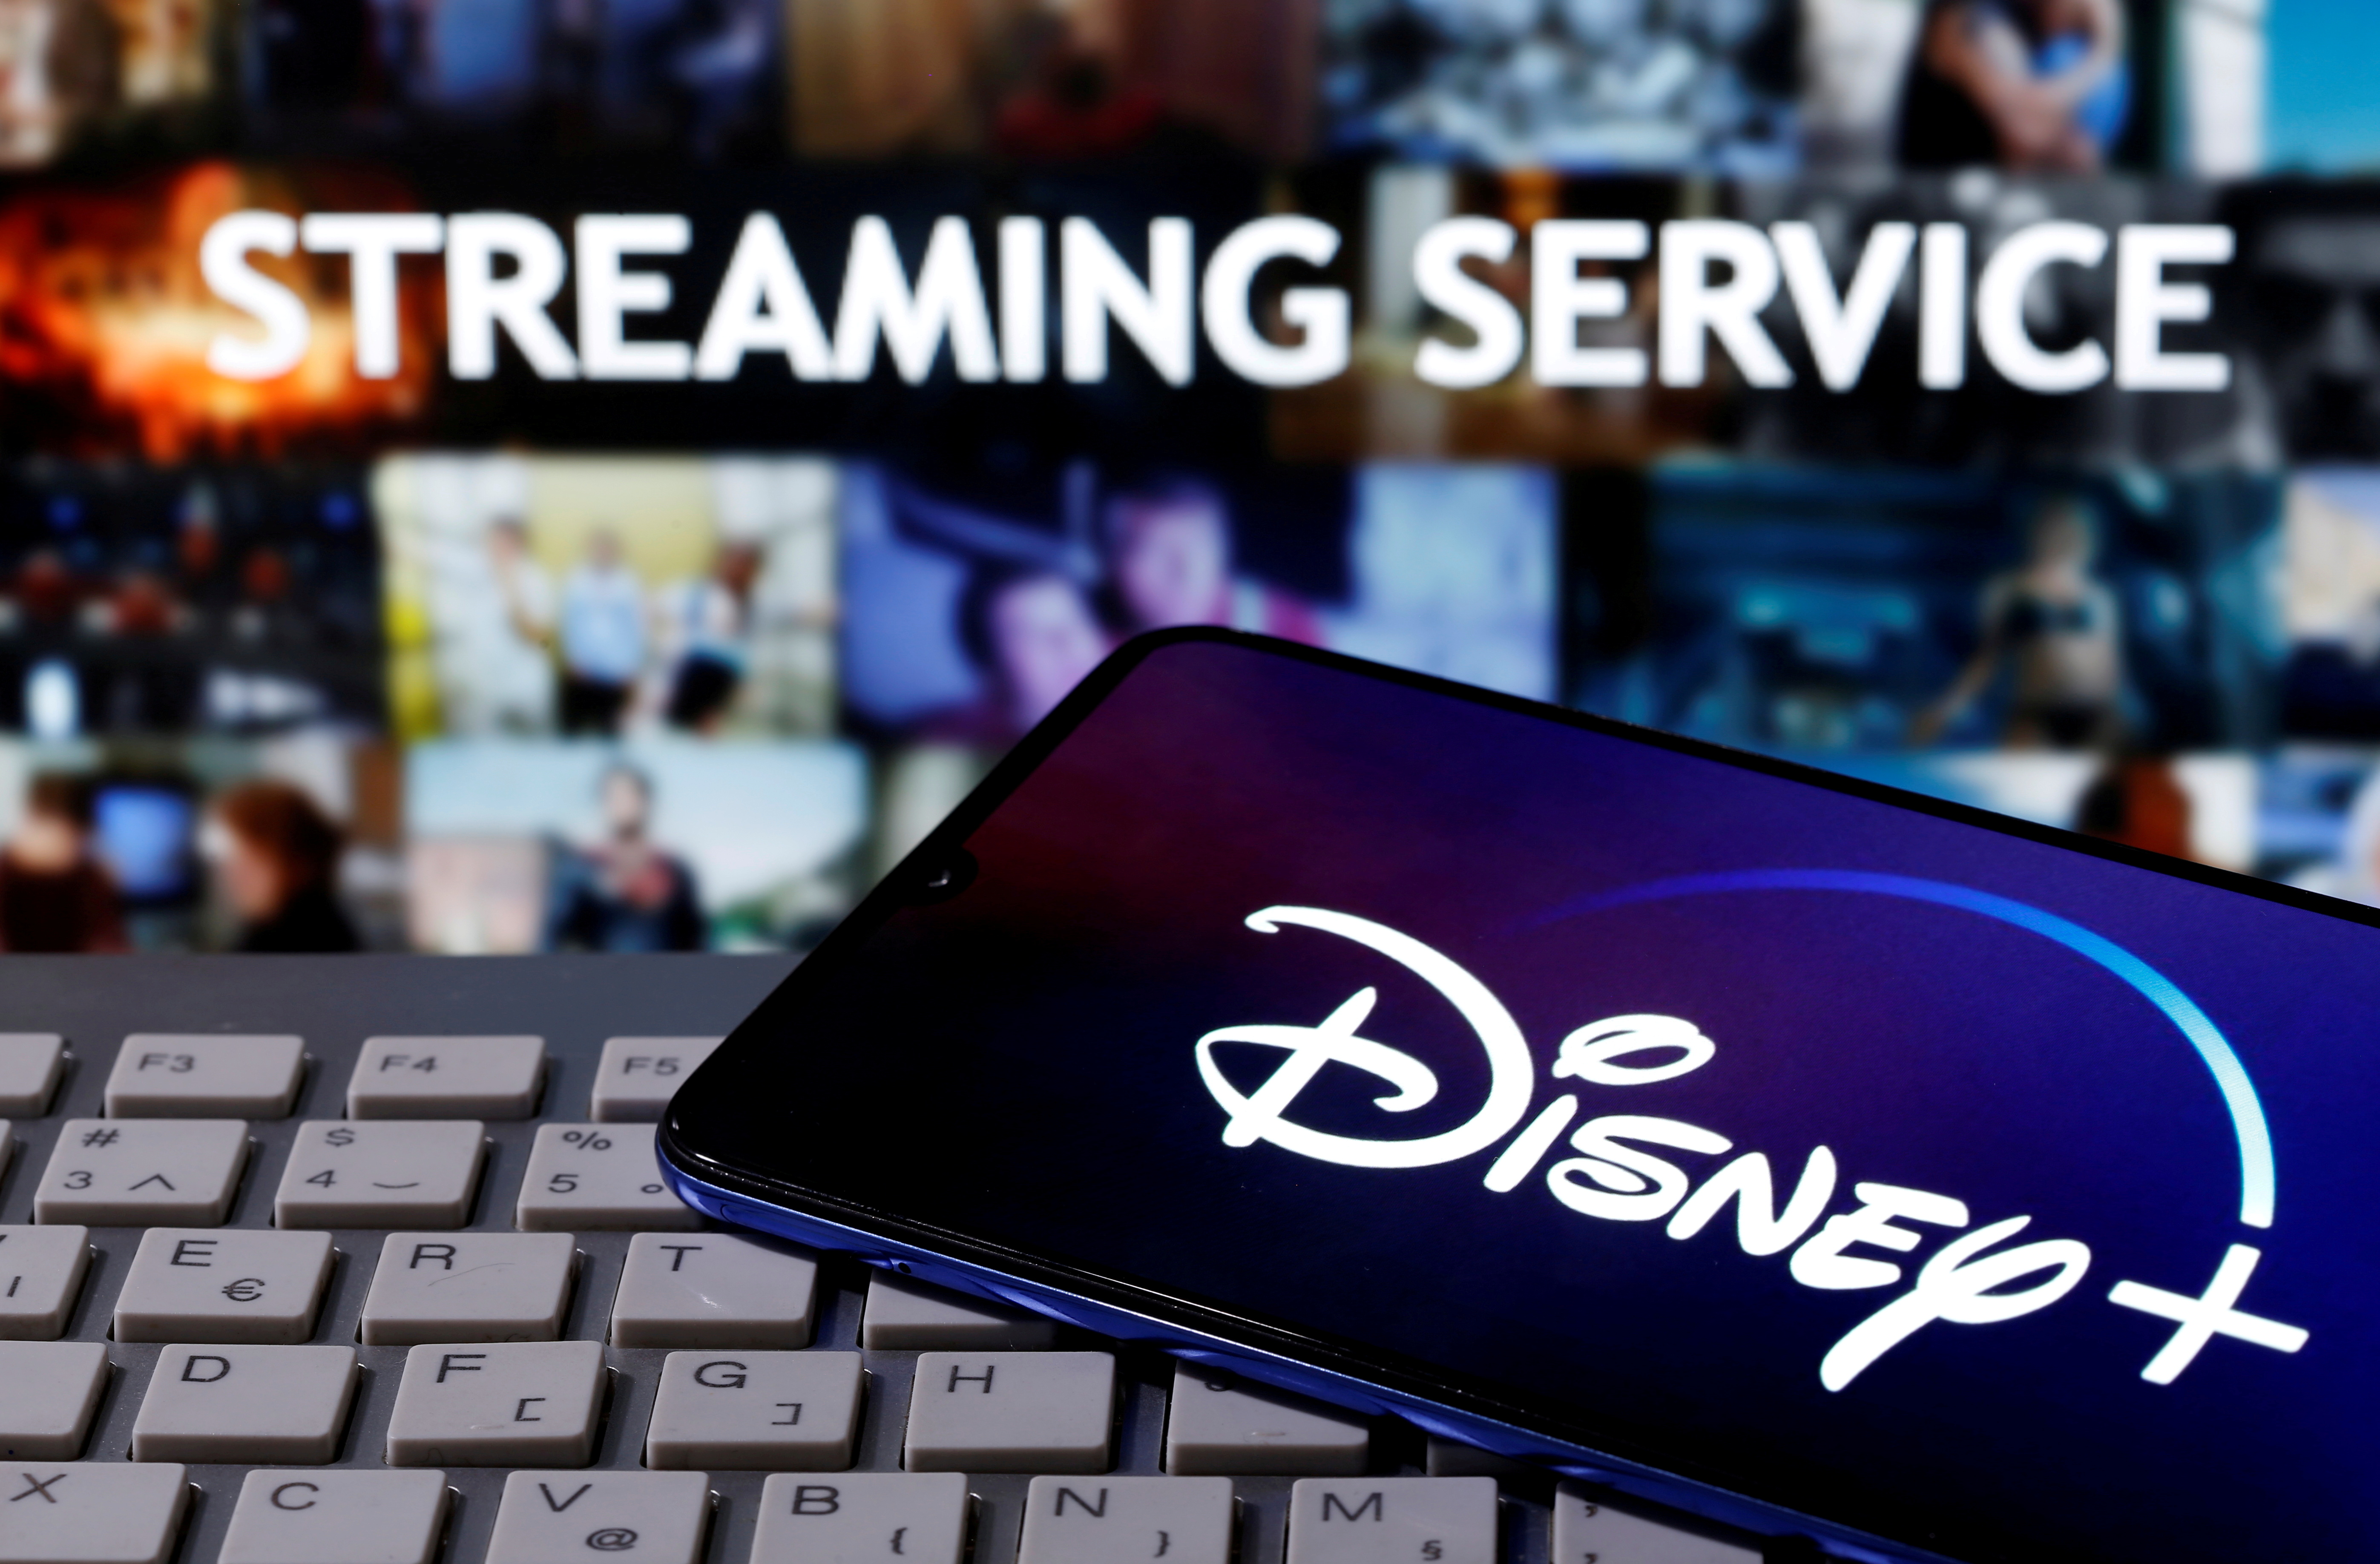 FILE PHOTO: Smartphone with the "Disney" logo is seen on a keyboard in front of the words "Streaming service\